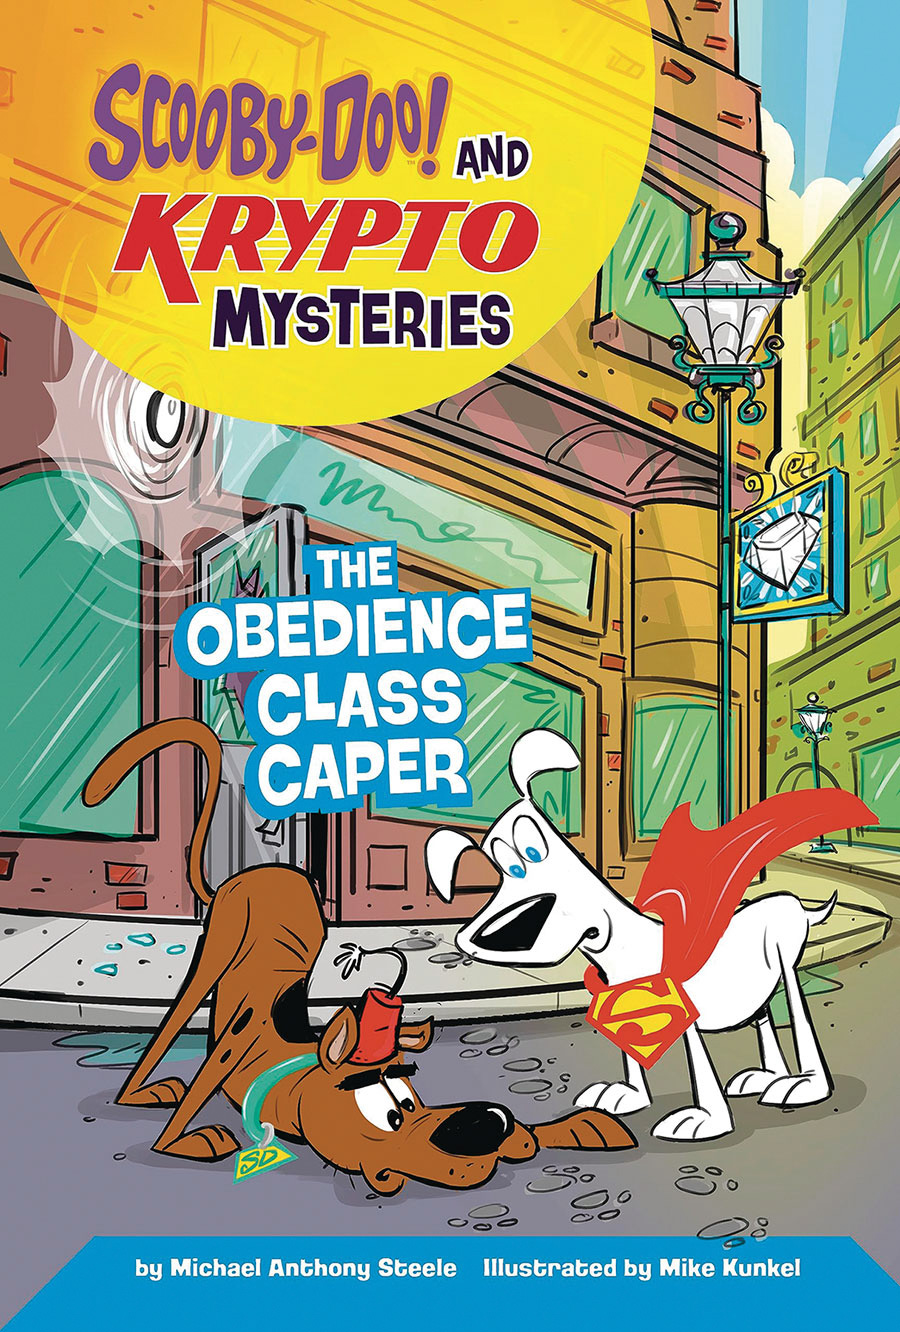 Scooby-Doo And Krypto Mysteries Obedience Class Caper TP